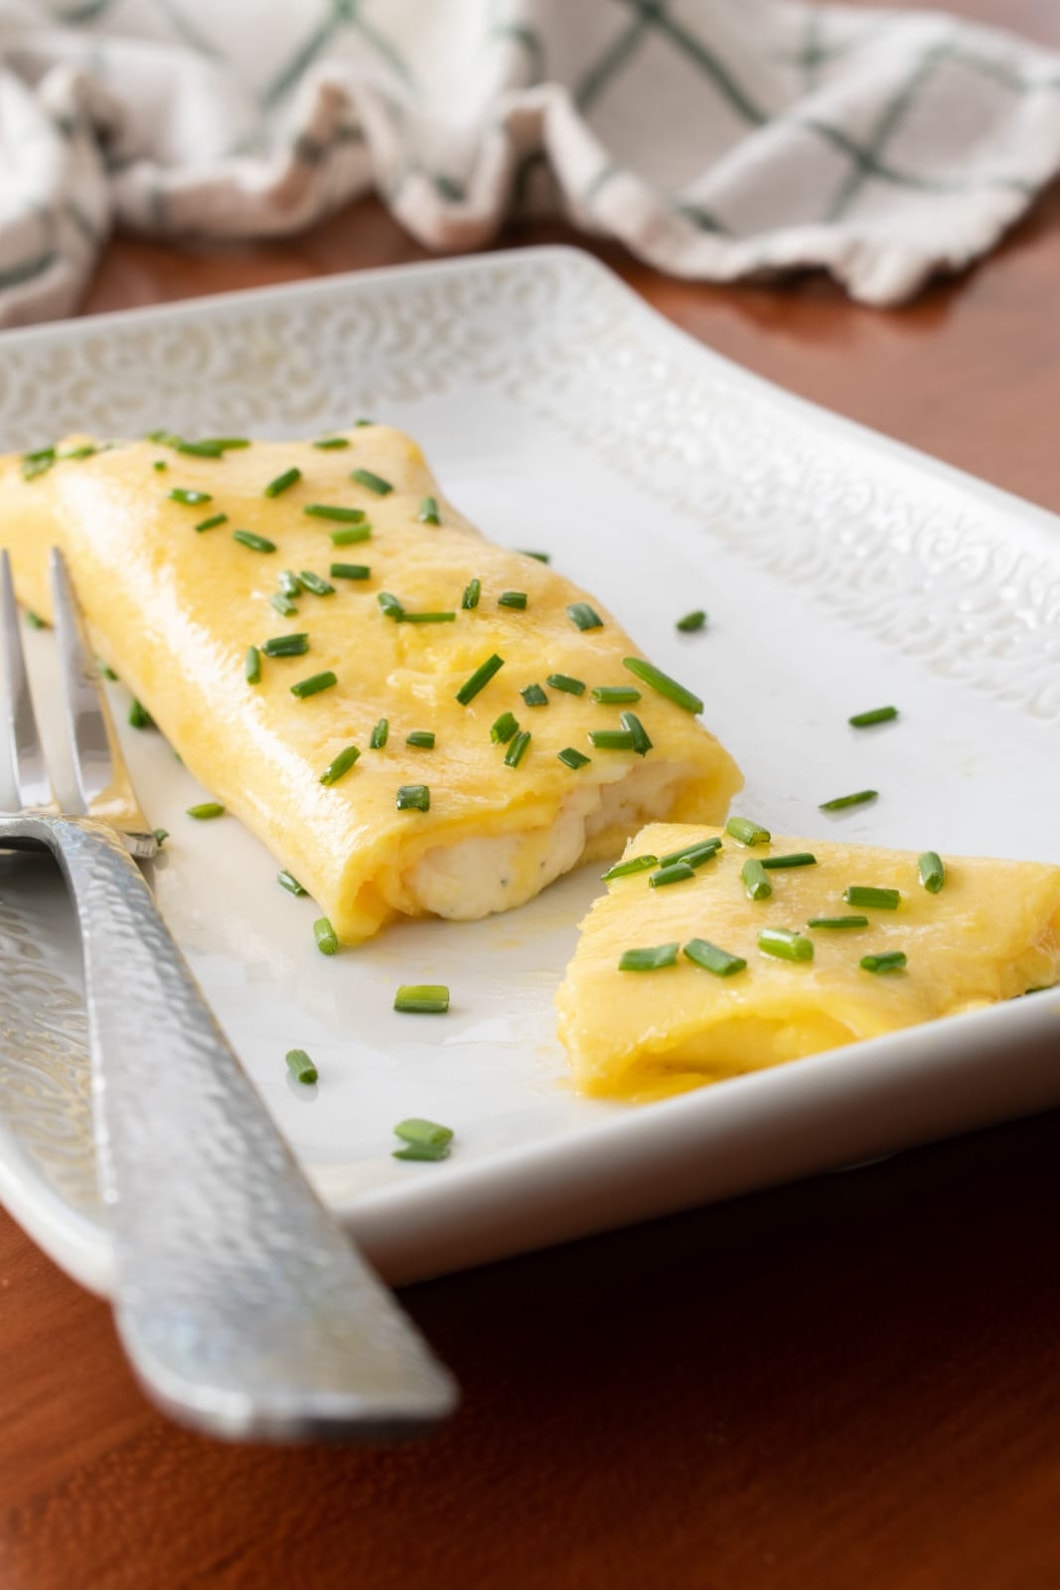 https://fortheloveofcooking-net.exactdn.com/wp-content/uploads/2020/09/French-Omelet-6379-2-2-1.jpg?strip=all&lossy=1&quality=90&resize=1060%2C1590&ssl=1